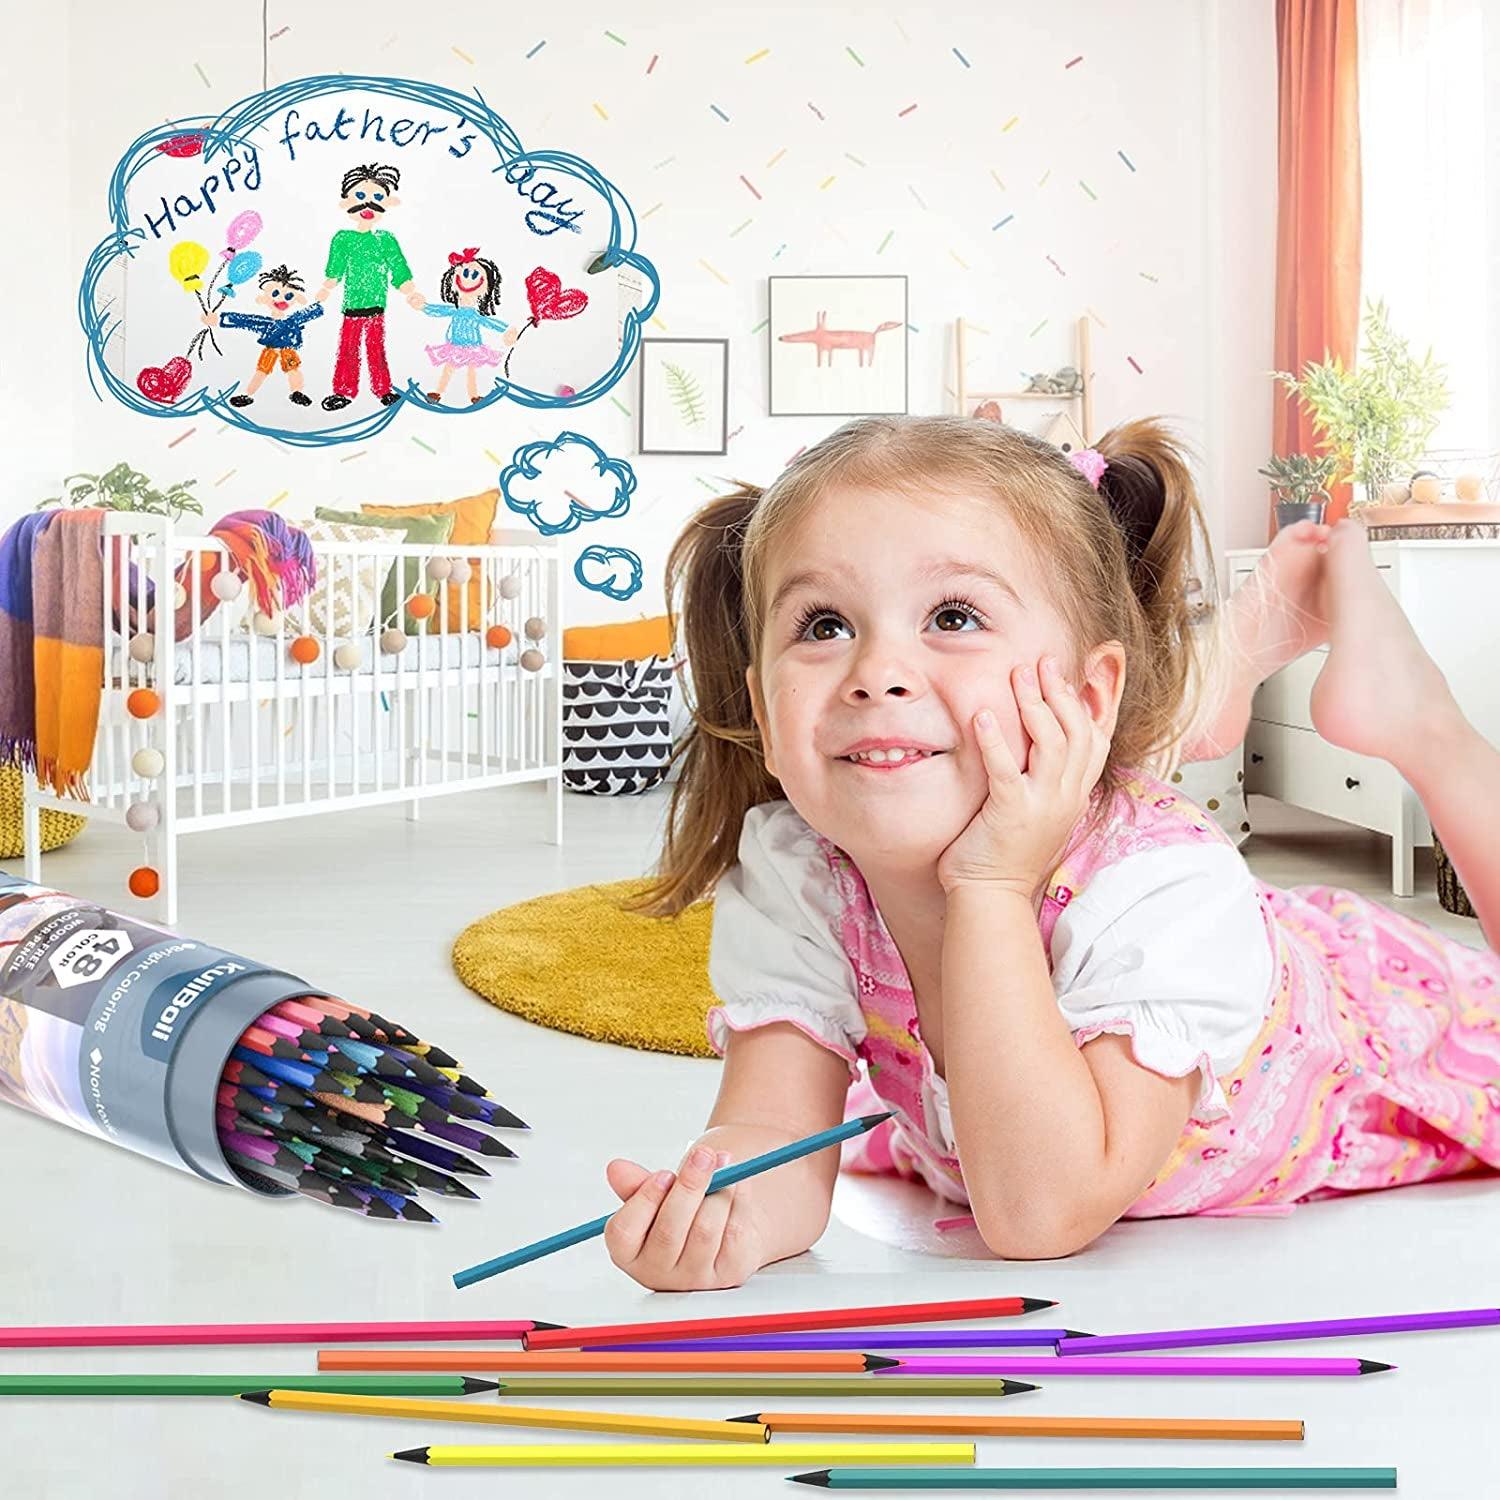 https://woodartsupply.com/cdn/shop/files/48-color-colored-pencils-suitable-for-adults-kids-and-coloring-books-artist-sketch-drawing-woodartsupply-5_f296b22d-9eac-42e8-955e-ef4611938dbc.jpg?v=1696162358&width=1946